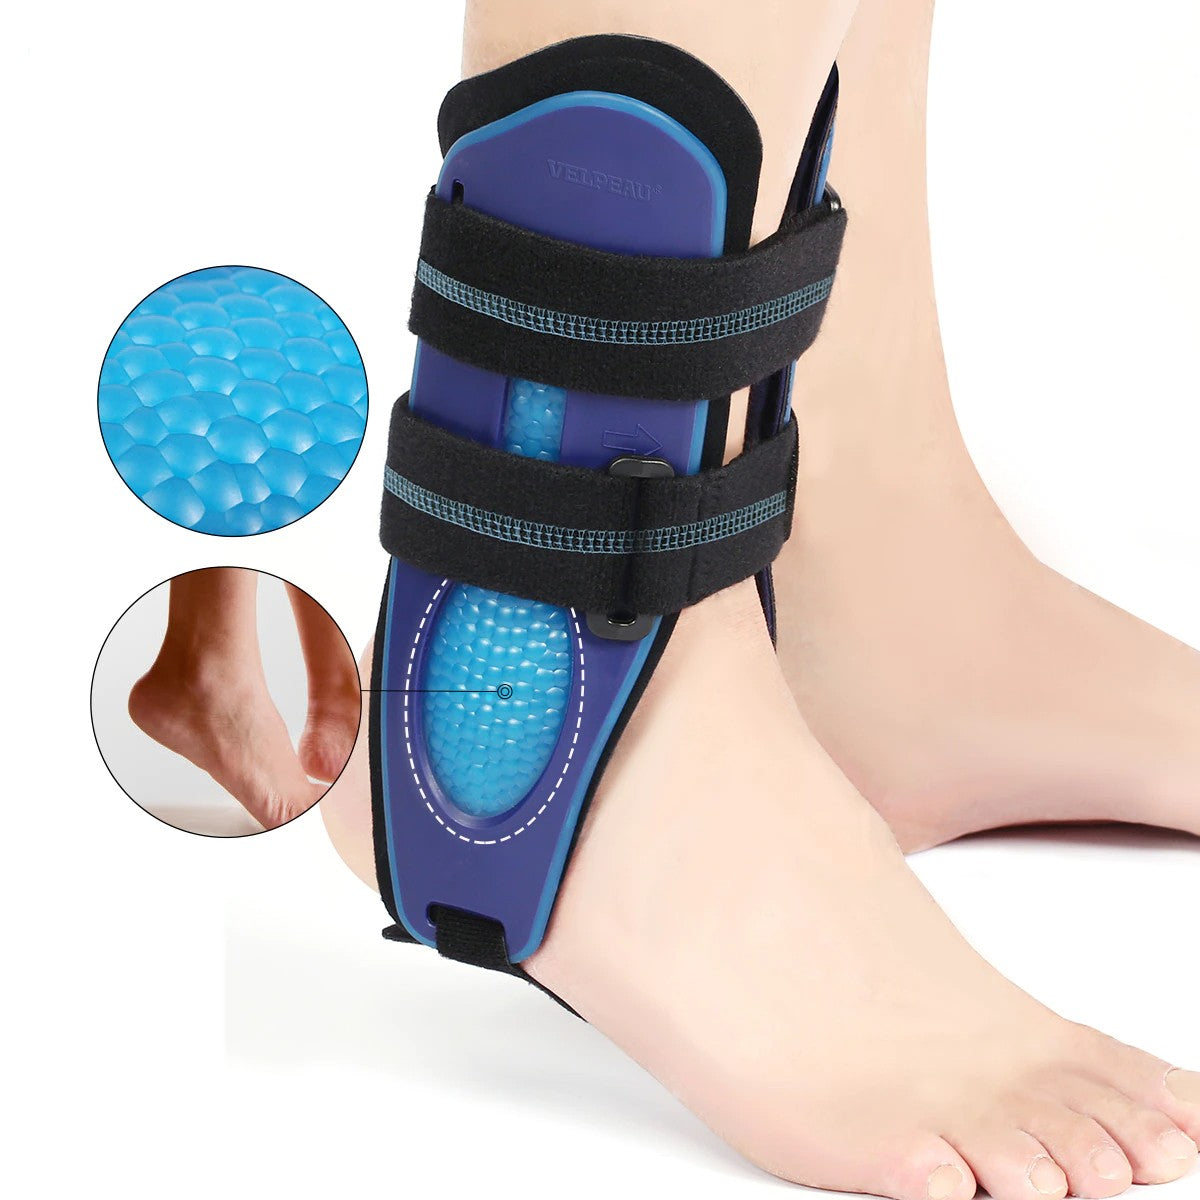 Ankle Foot Orthosis for Sprain